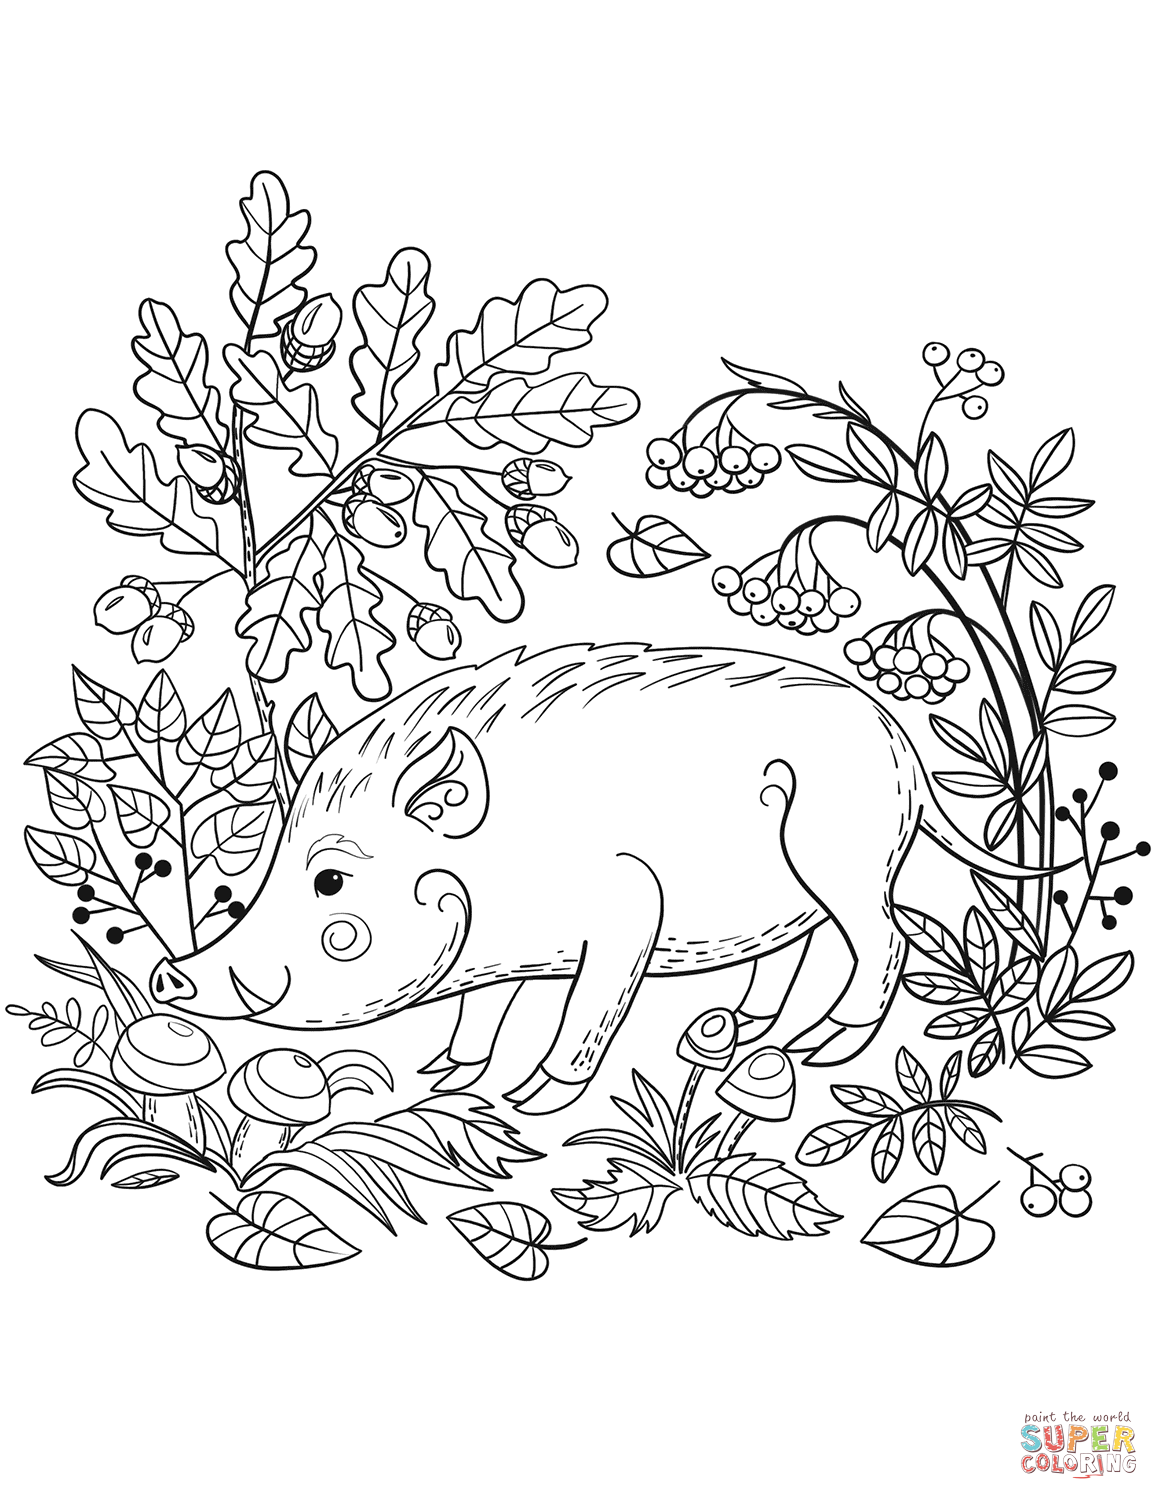 Wild Boar in the Forest coloring page | Free Printable Coloring Pages